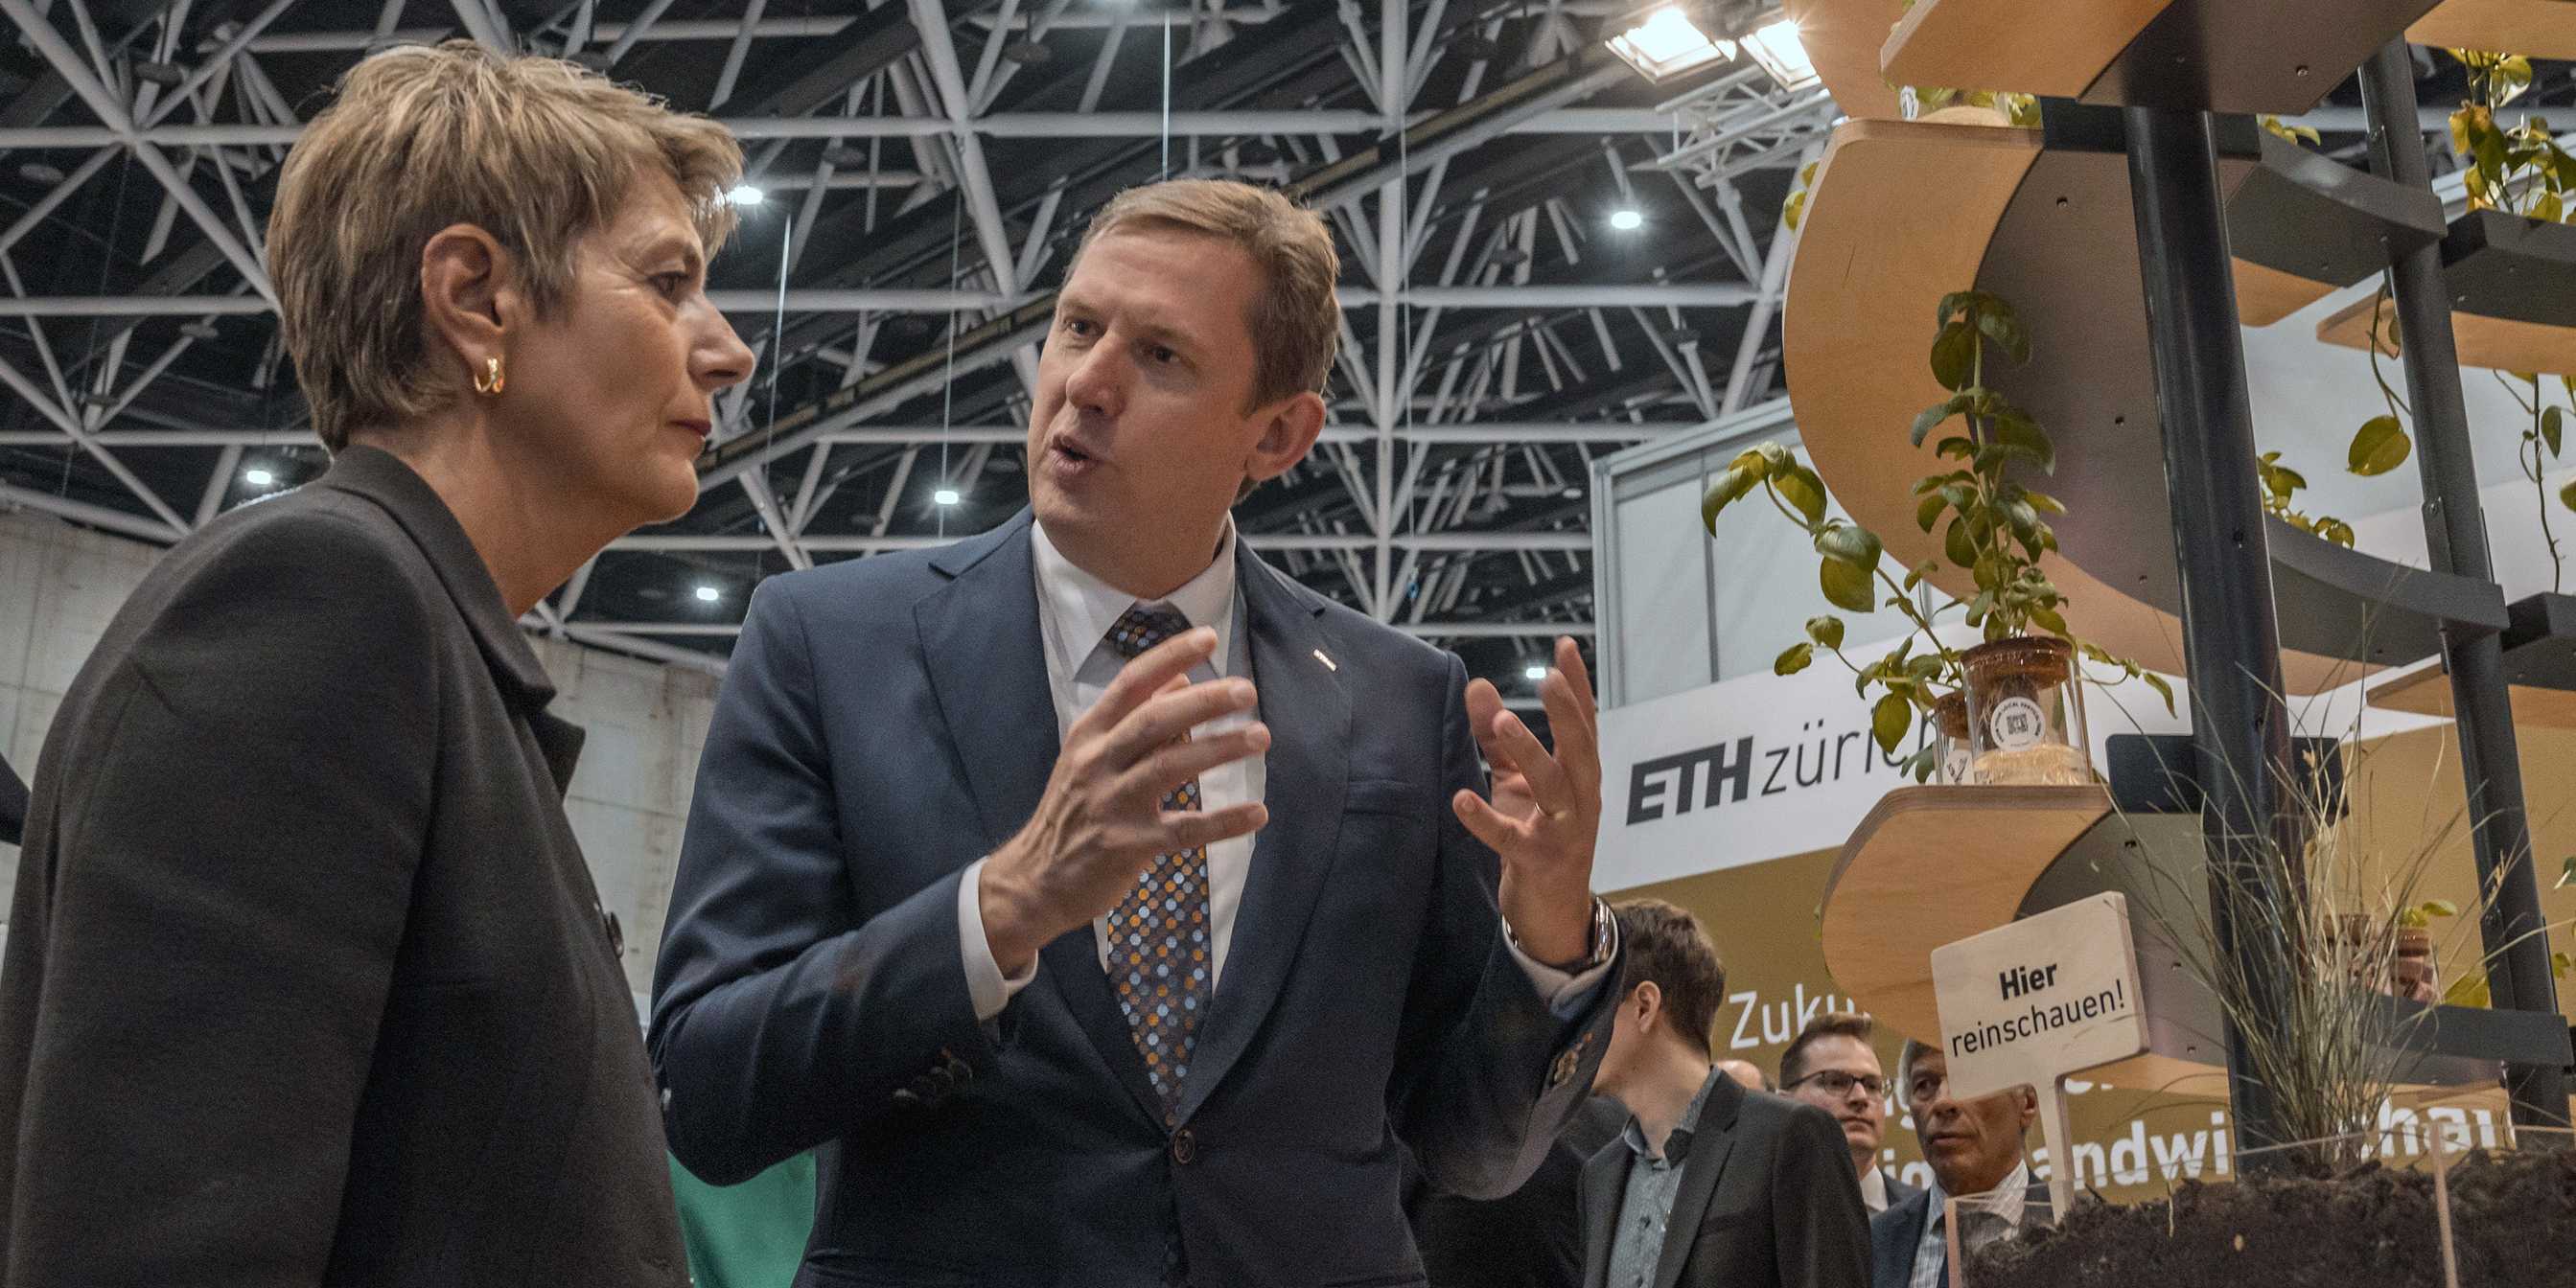 Christian Wolfrum stands to the right of Karin Keller-Sutter and explains the ETH Zurich stand to her